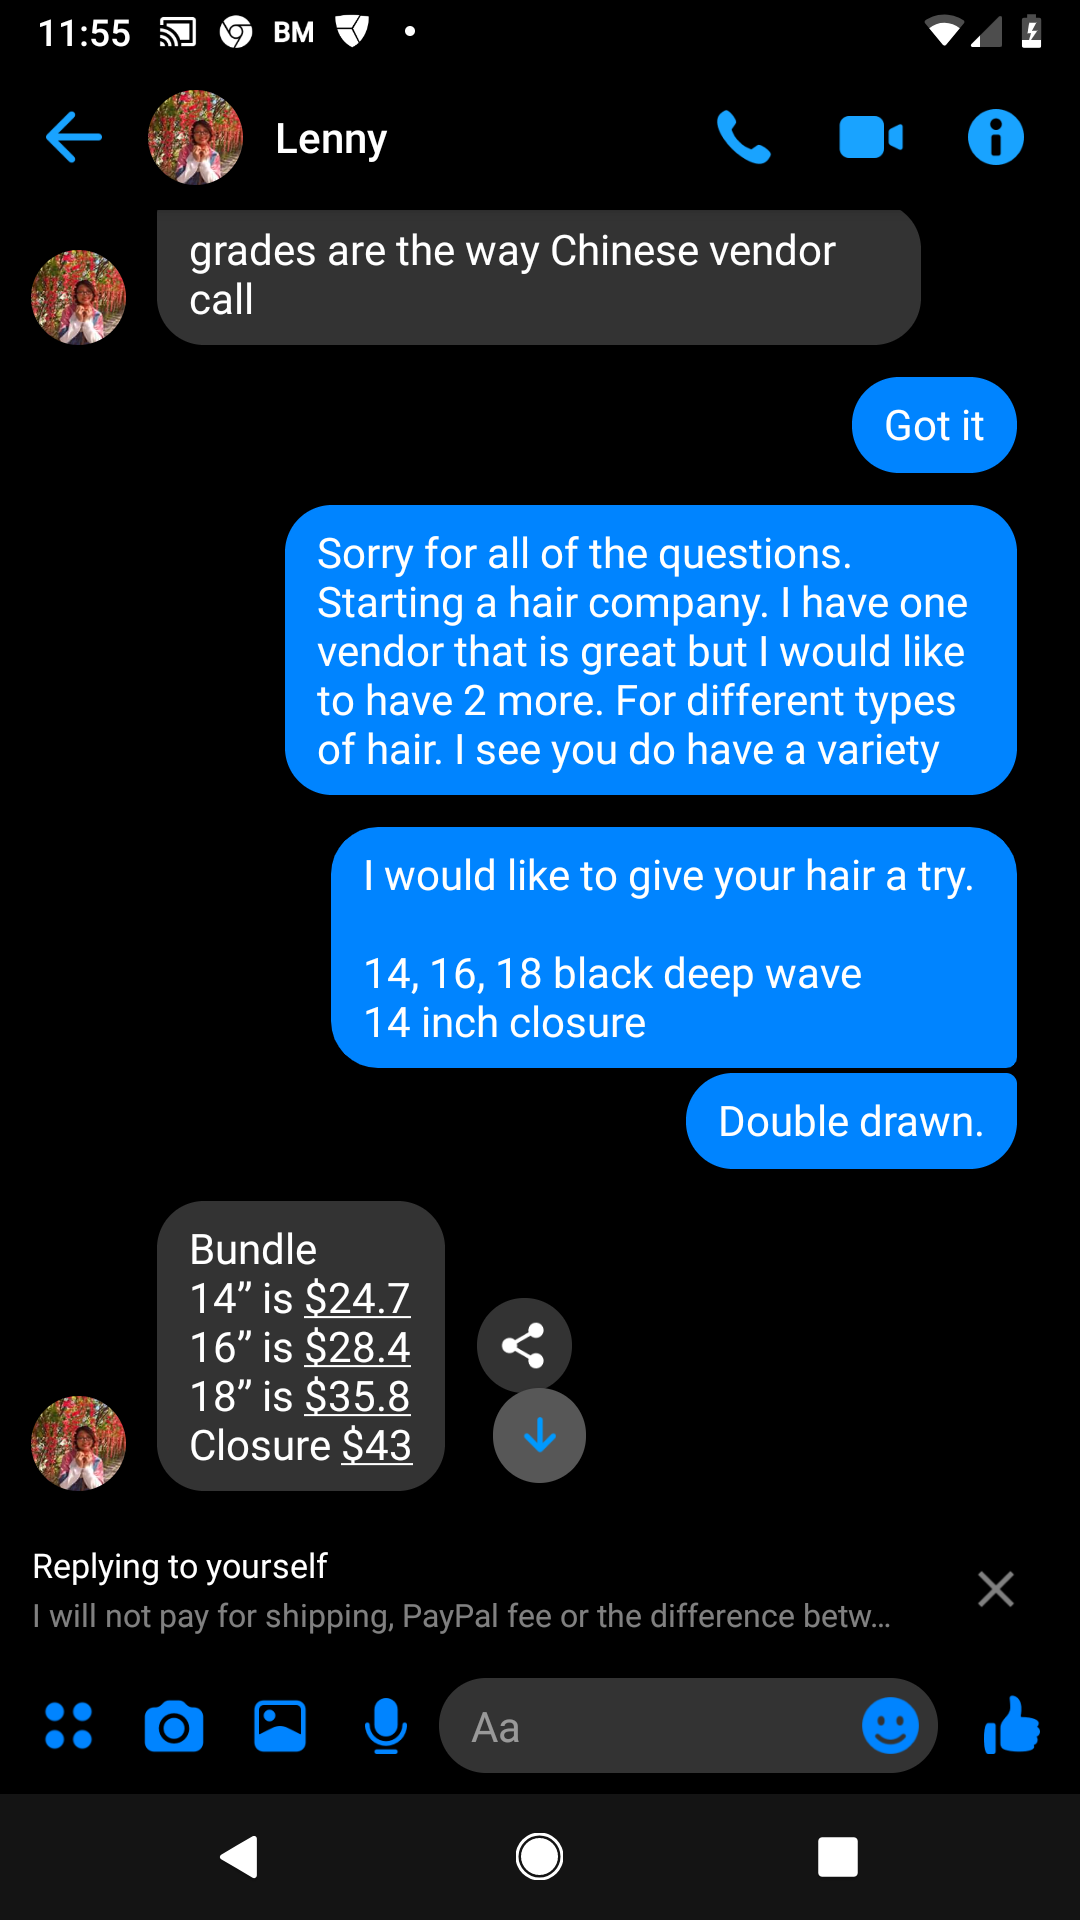 You will lose customers if you sell hair